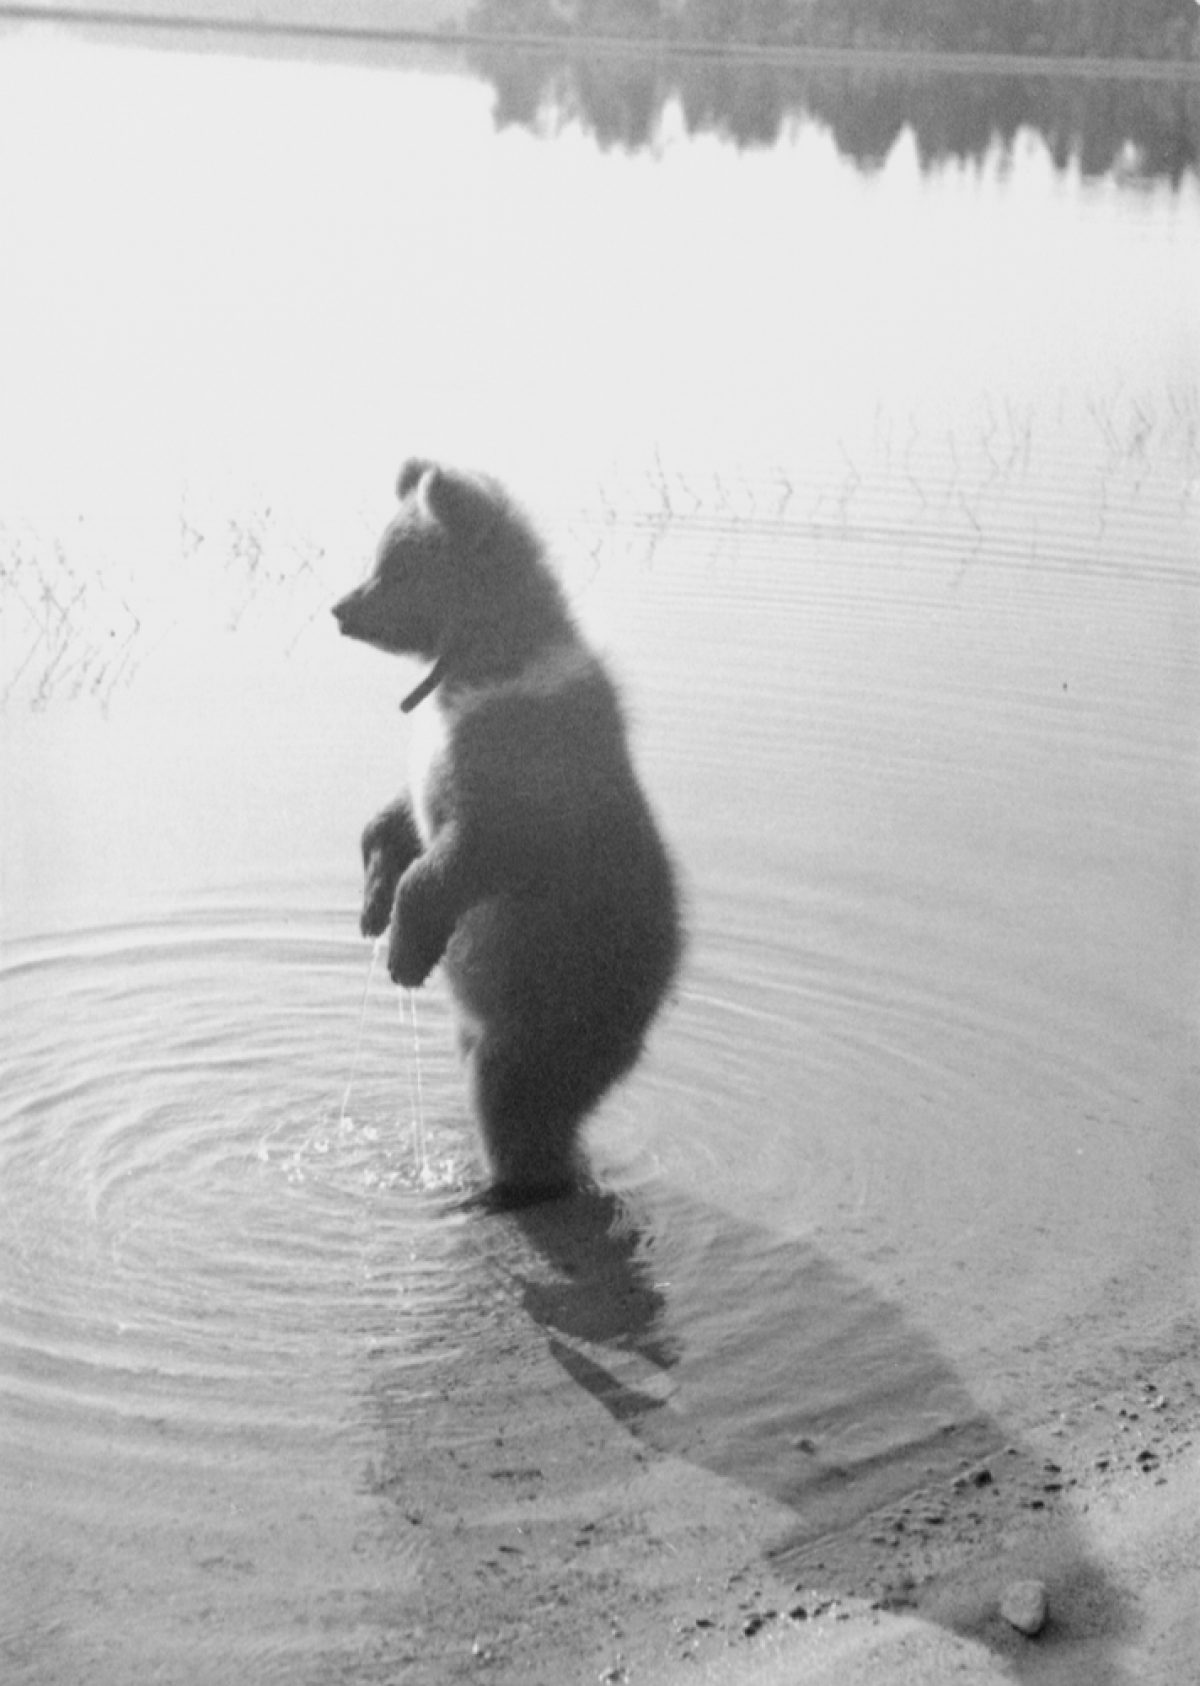 Mesikkä having a morning bath at lake Novika in 1944. Photo: Pauli Jänis / Picture Collections of the Finnish Heritage Agency